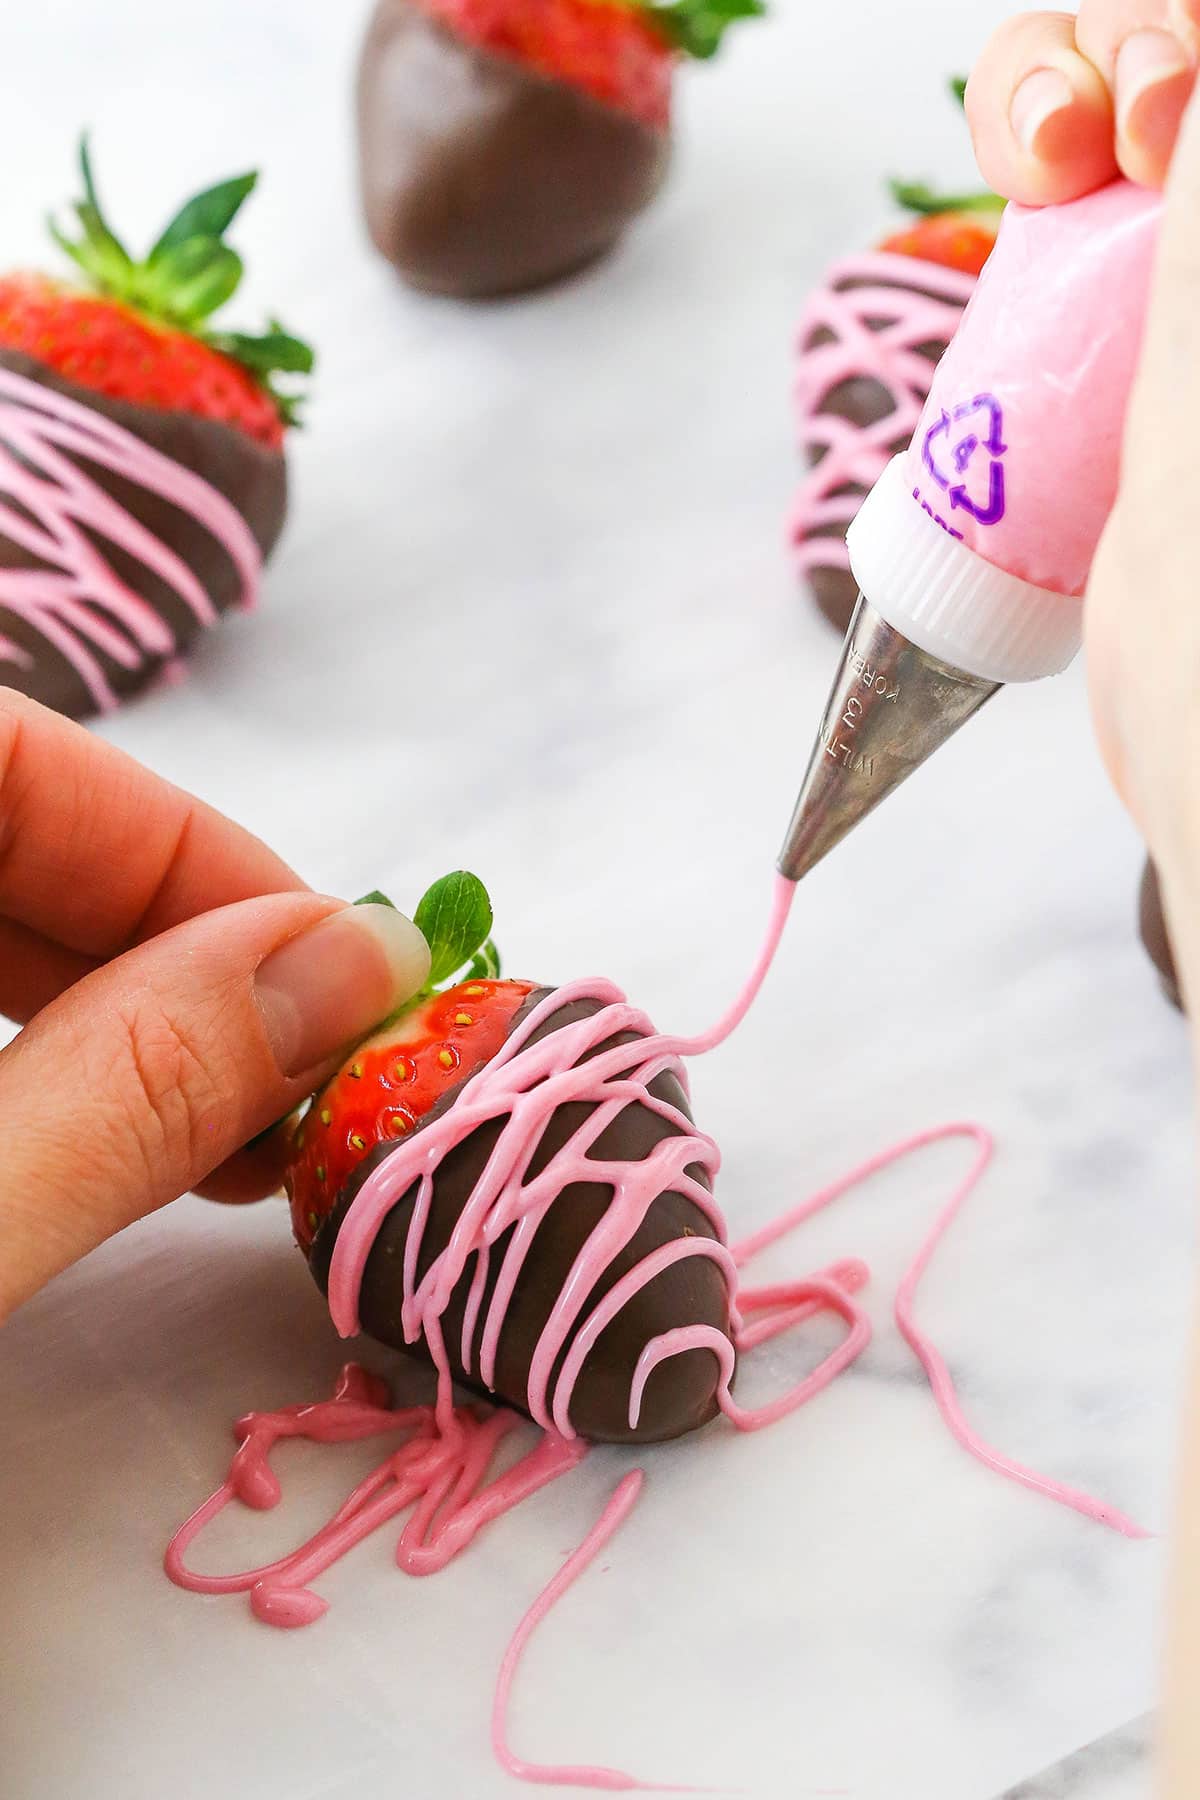 A Chocolate Covered Strawberry being decorated with pink frosting using a piping bag and small piping tip